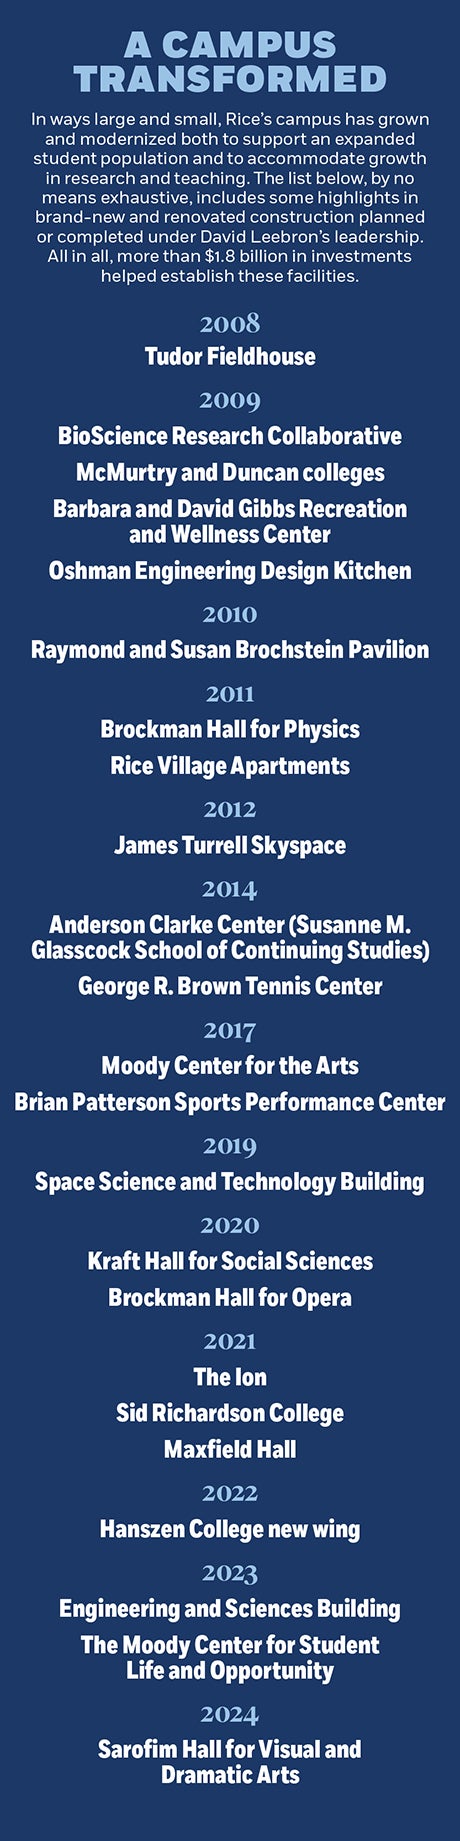 In ways large and small, Rice’s campus has grown and modernized both to support an expanded student population and to accommodate growth in research and teaching. The list below, by no means exhaustive, includes some highlights in brand-new and renovated construction planned or completed under David Leebron’s leadership. All in all, more than $1.8 billion in investments helped establish these facilities.